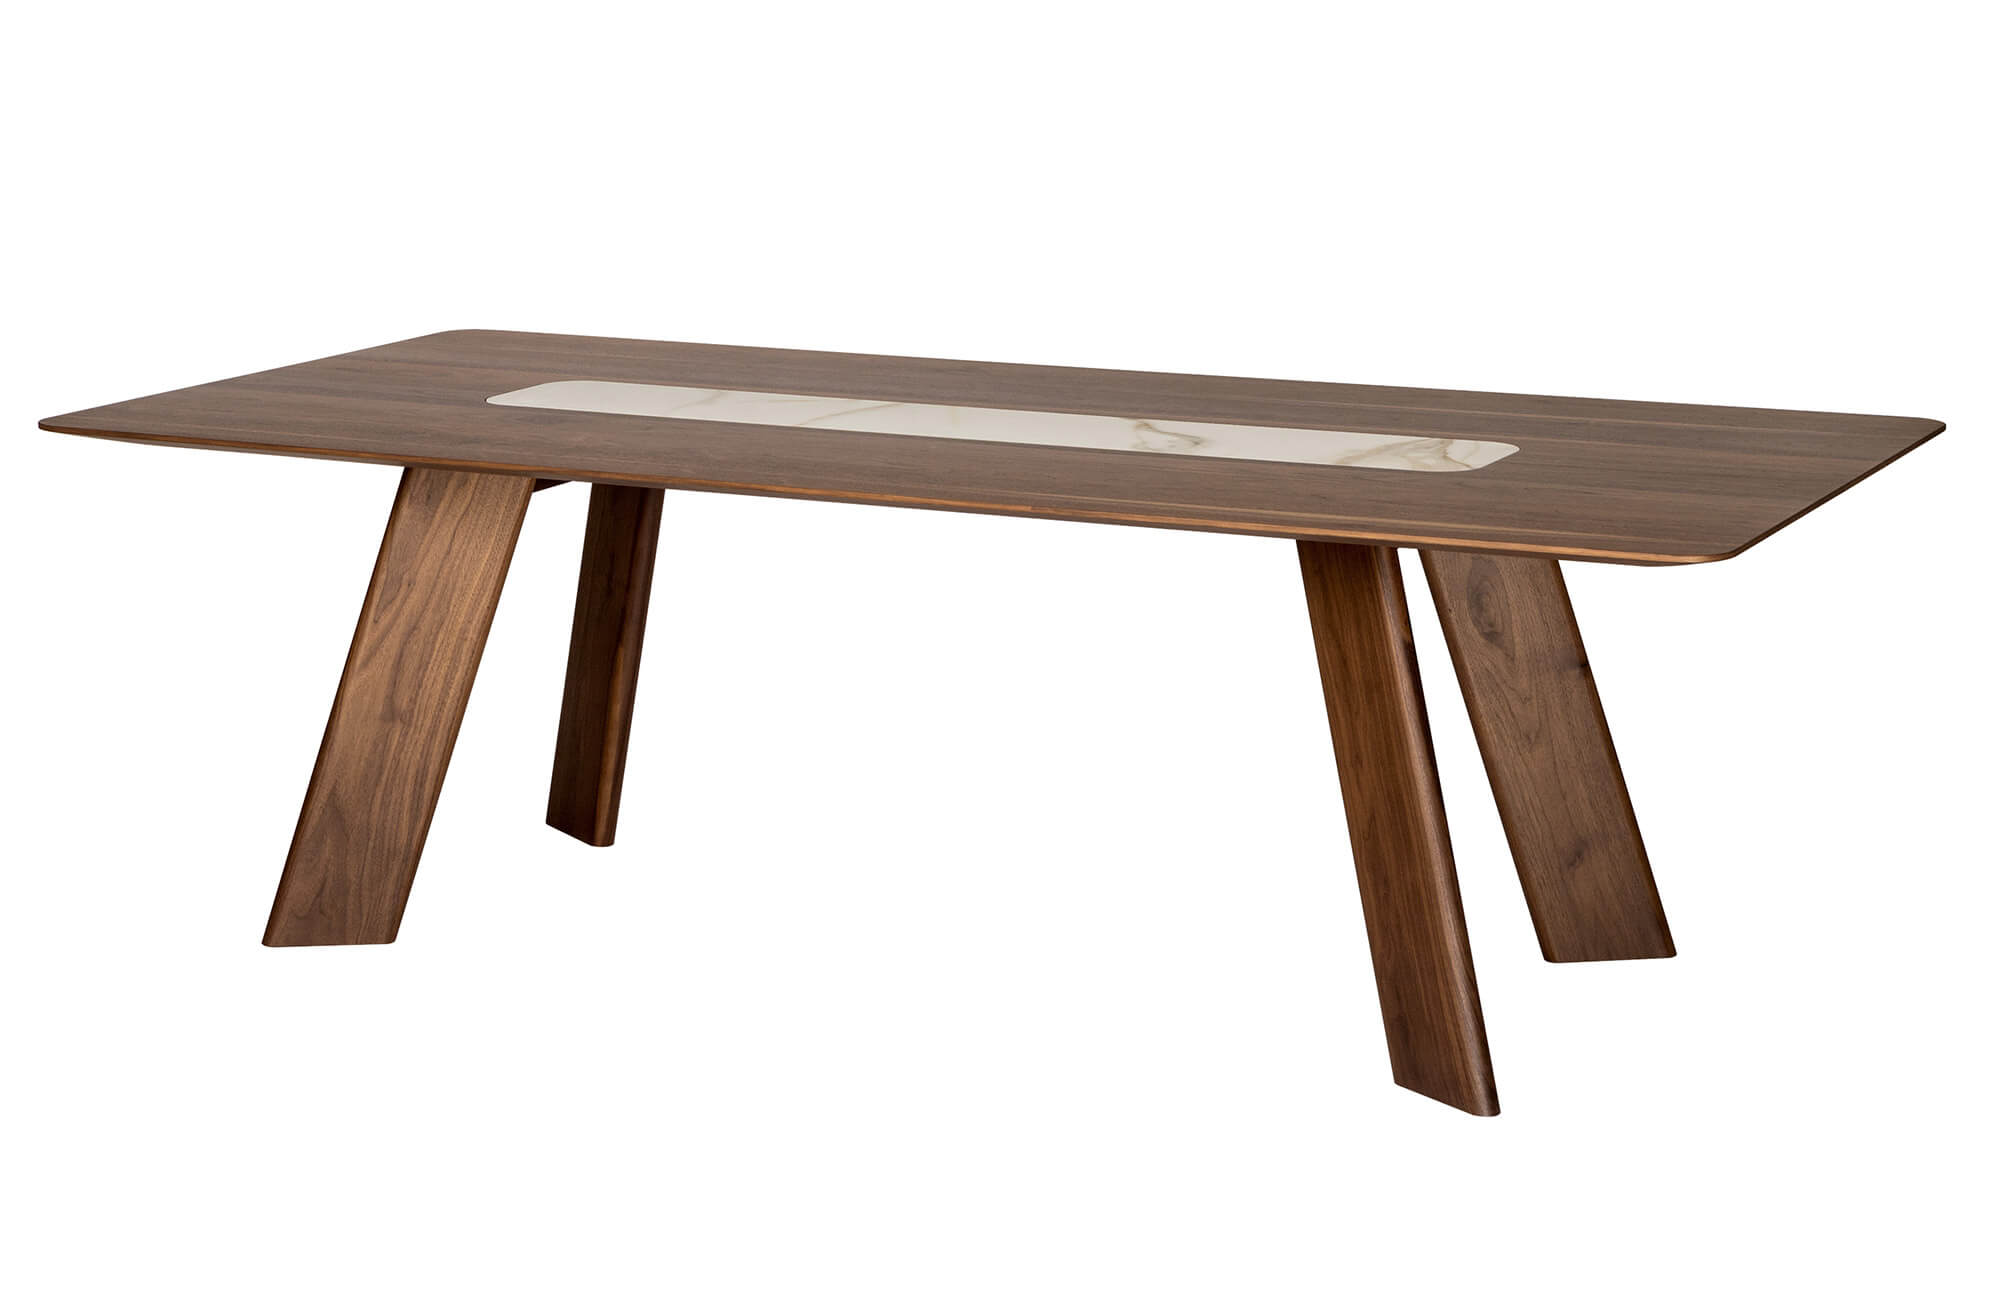 Alhambra a wcer 001 dining table in walnut and ceramic